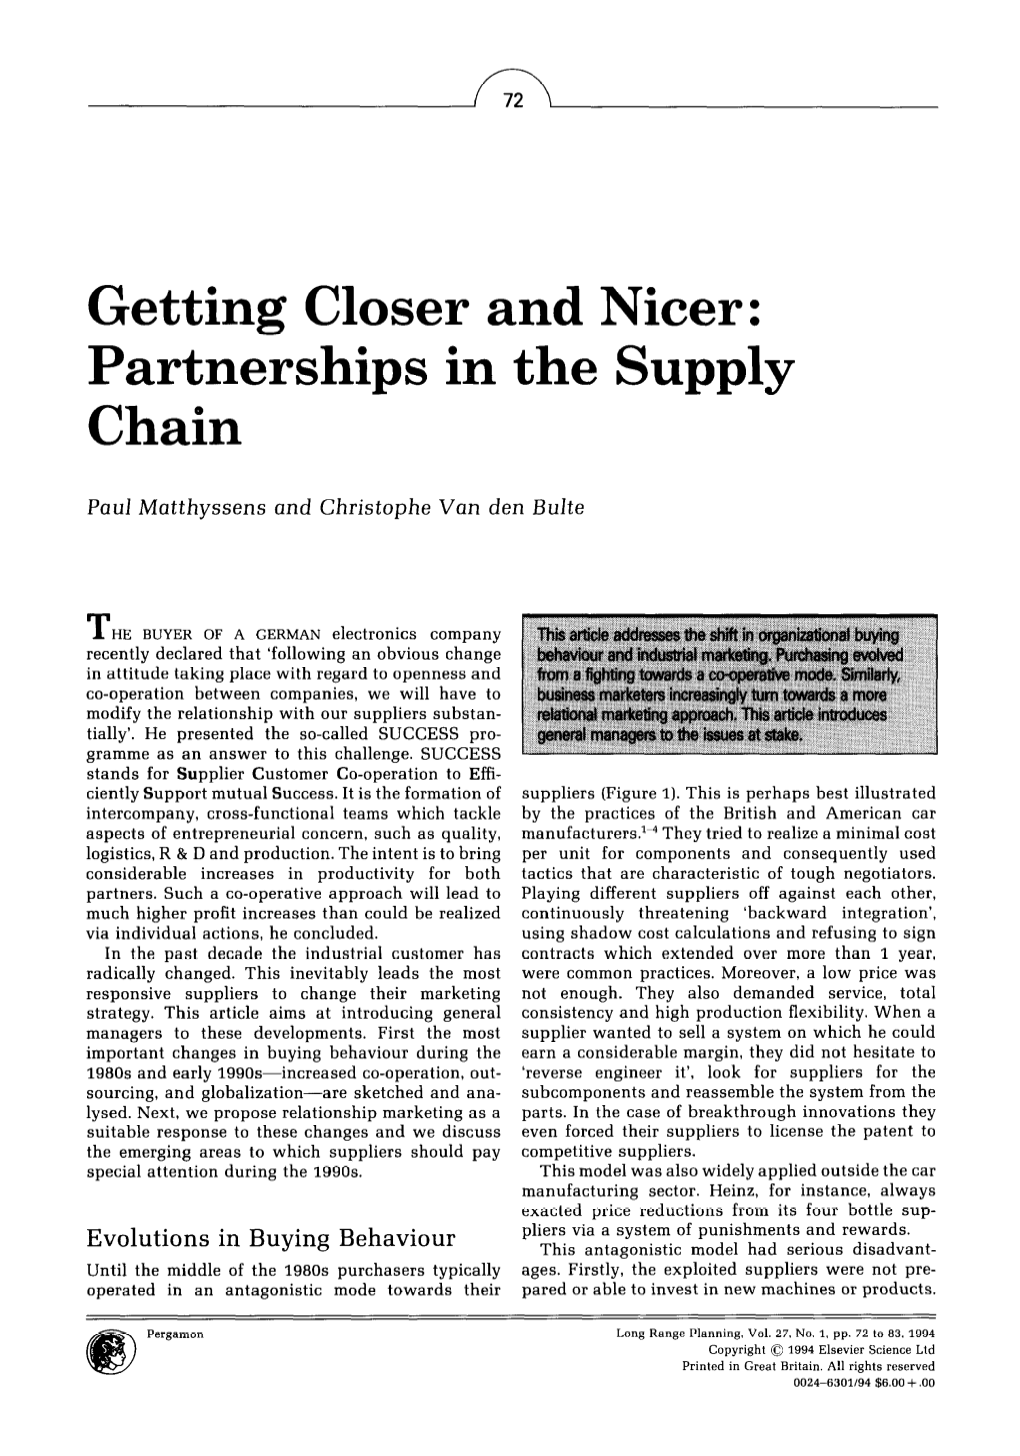 Getting Closer and Nicer: Partnerships in the Supply Chain